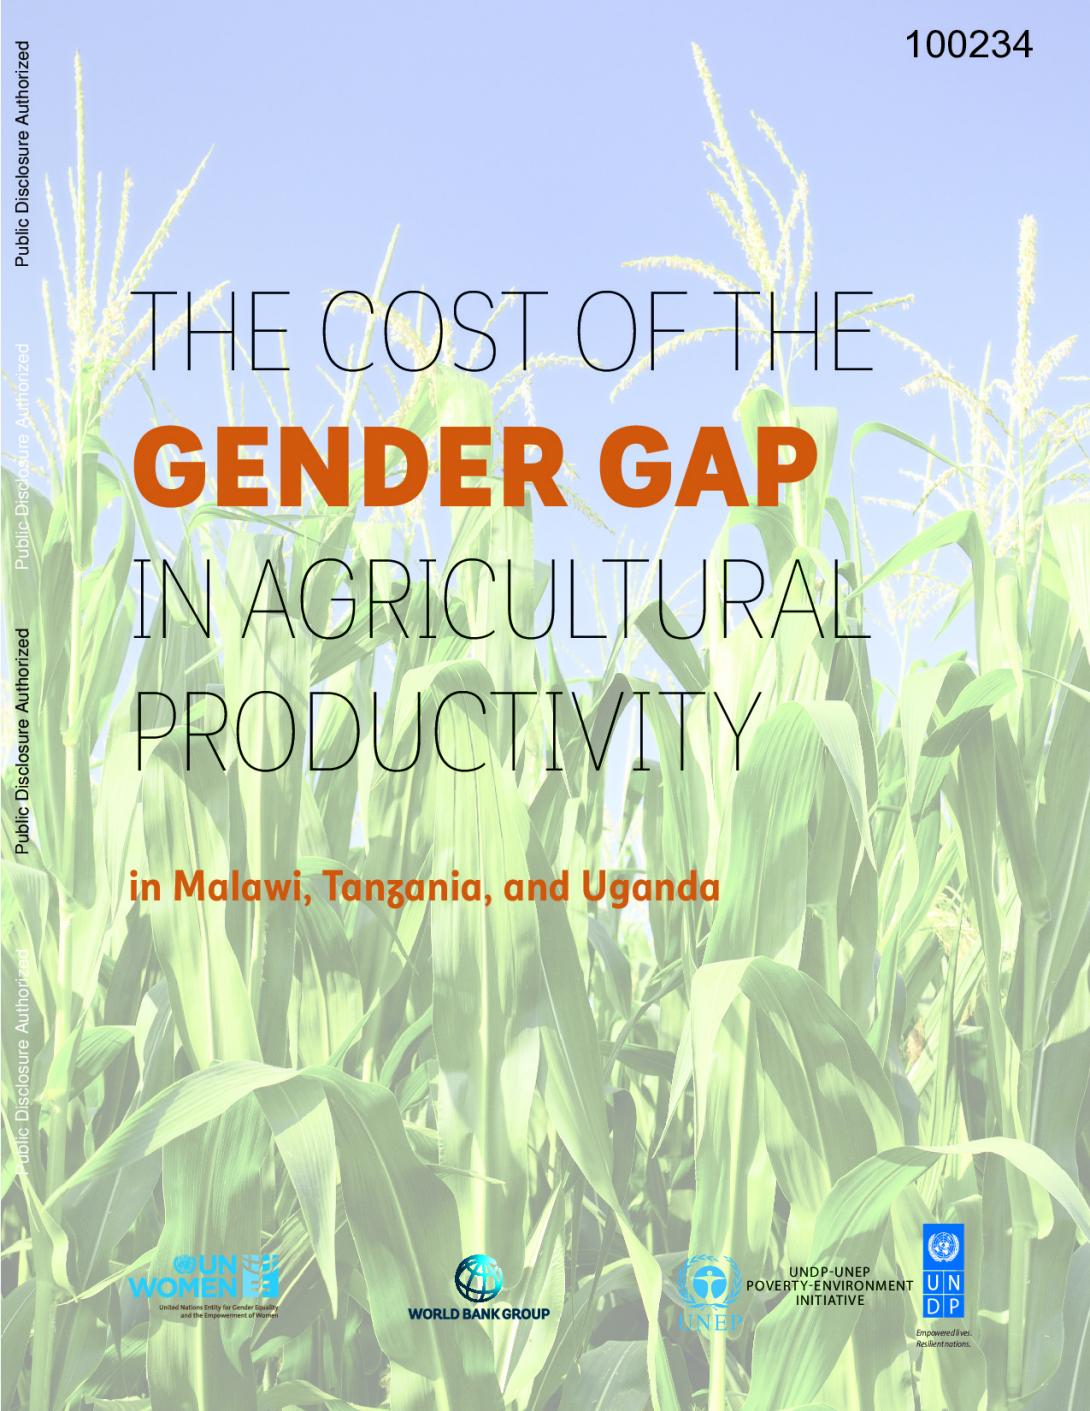 The cost of the gender gap in agricultural productivity in Malawi, Tanzania, and Uganda